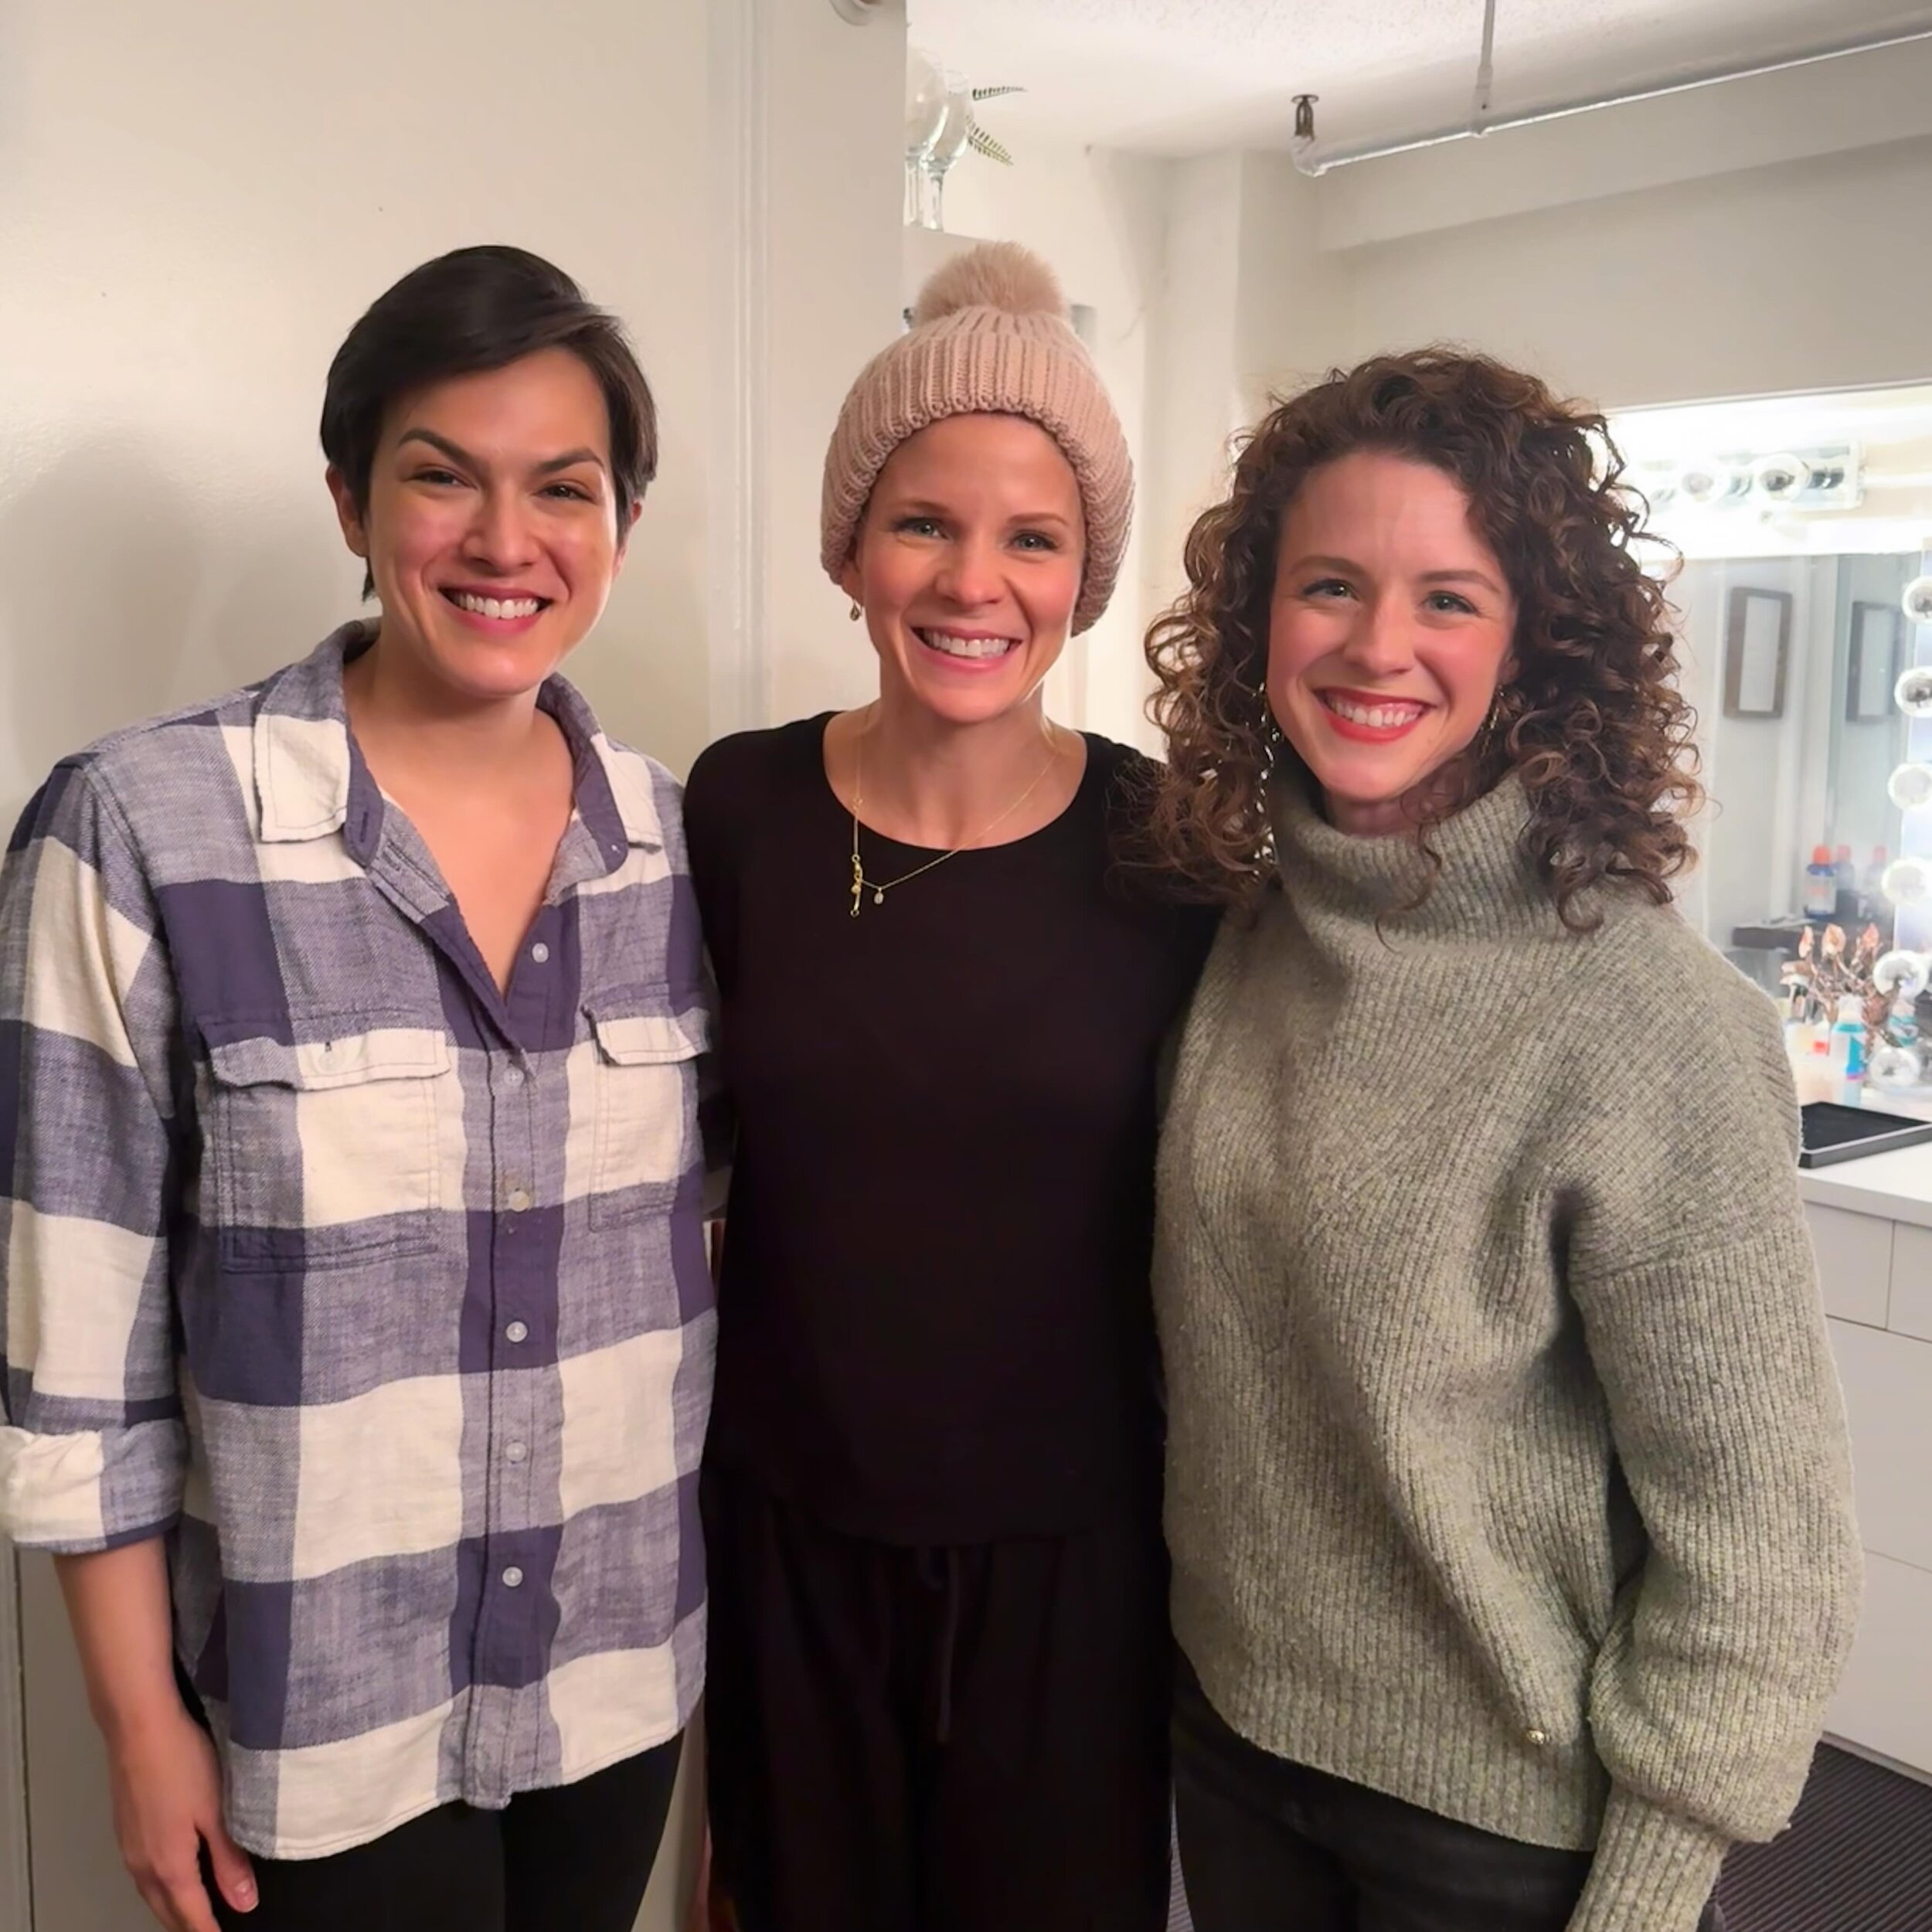 I&rsquo;m so grateful for these two special women and friends. What an incredible afternoon of theatre. Kelli&rsquo;s gift is shared with such heartbreaking beauty and depth in @wineandrosesbway . And those who know my friend, Nicole, know just how s